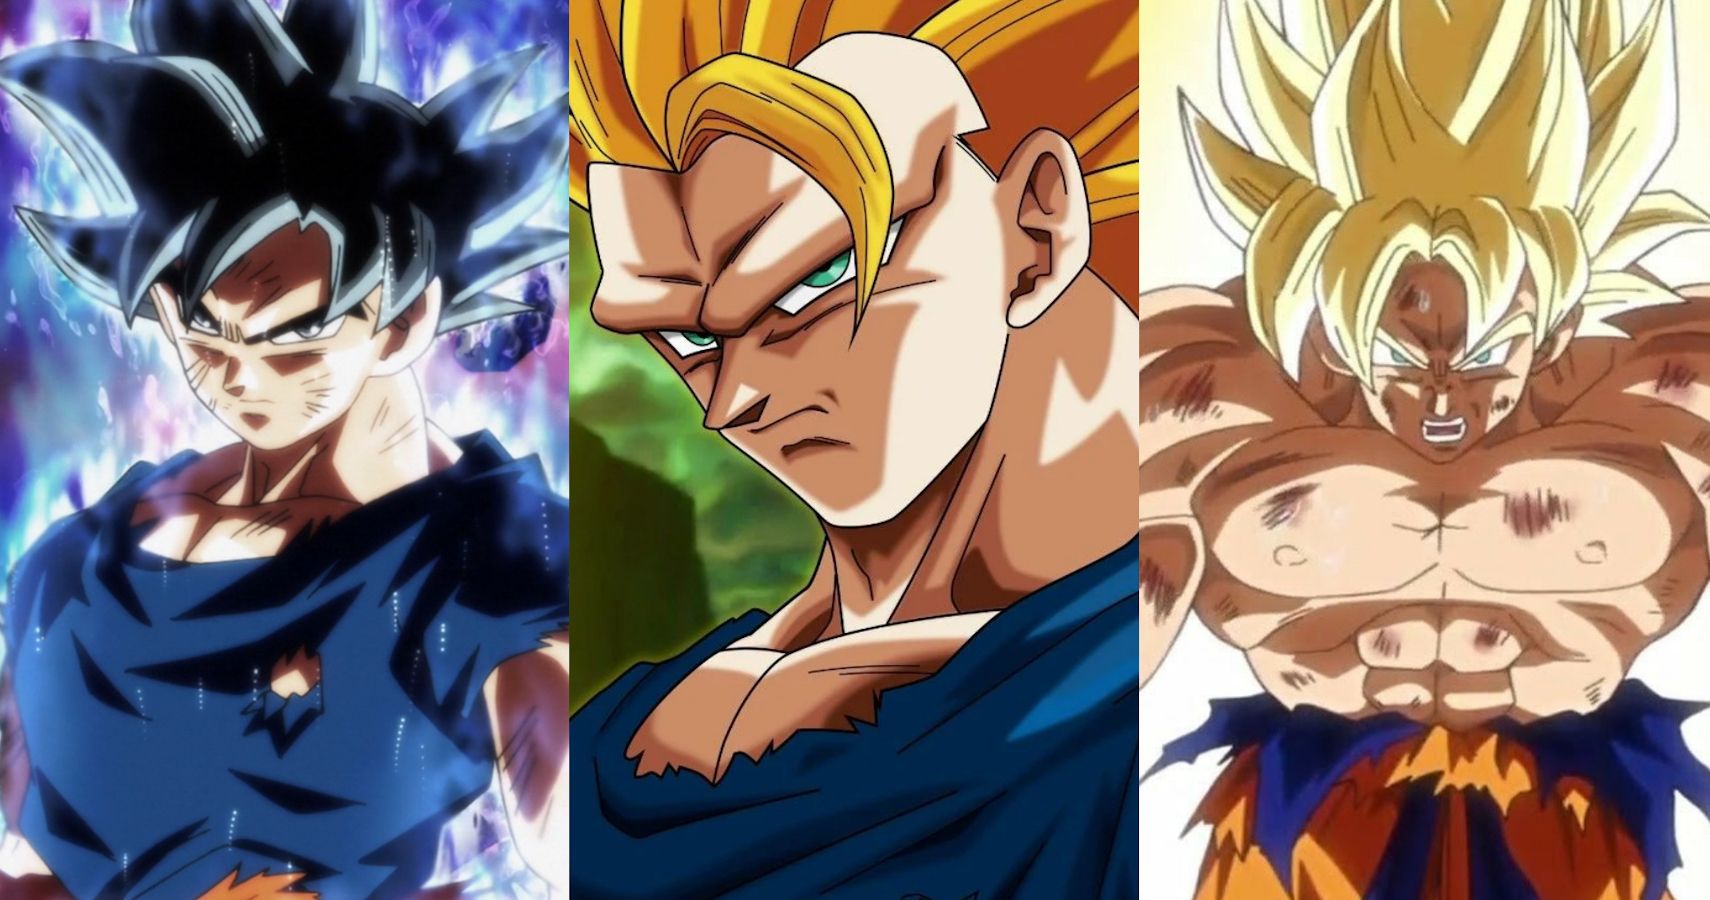 What do you think Anime goku scales to at Max and where do you think manga  goku scales to at max? (Who do you think is stronger?) : r/PowerScaling